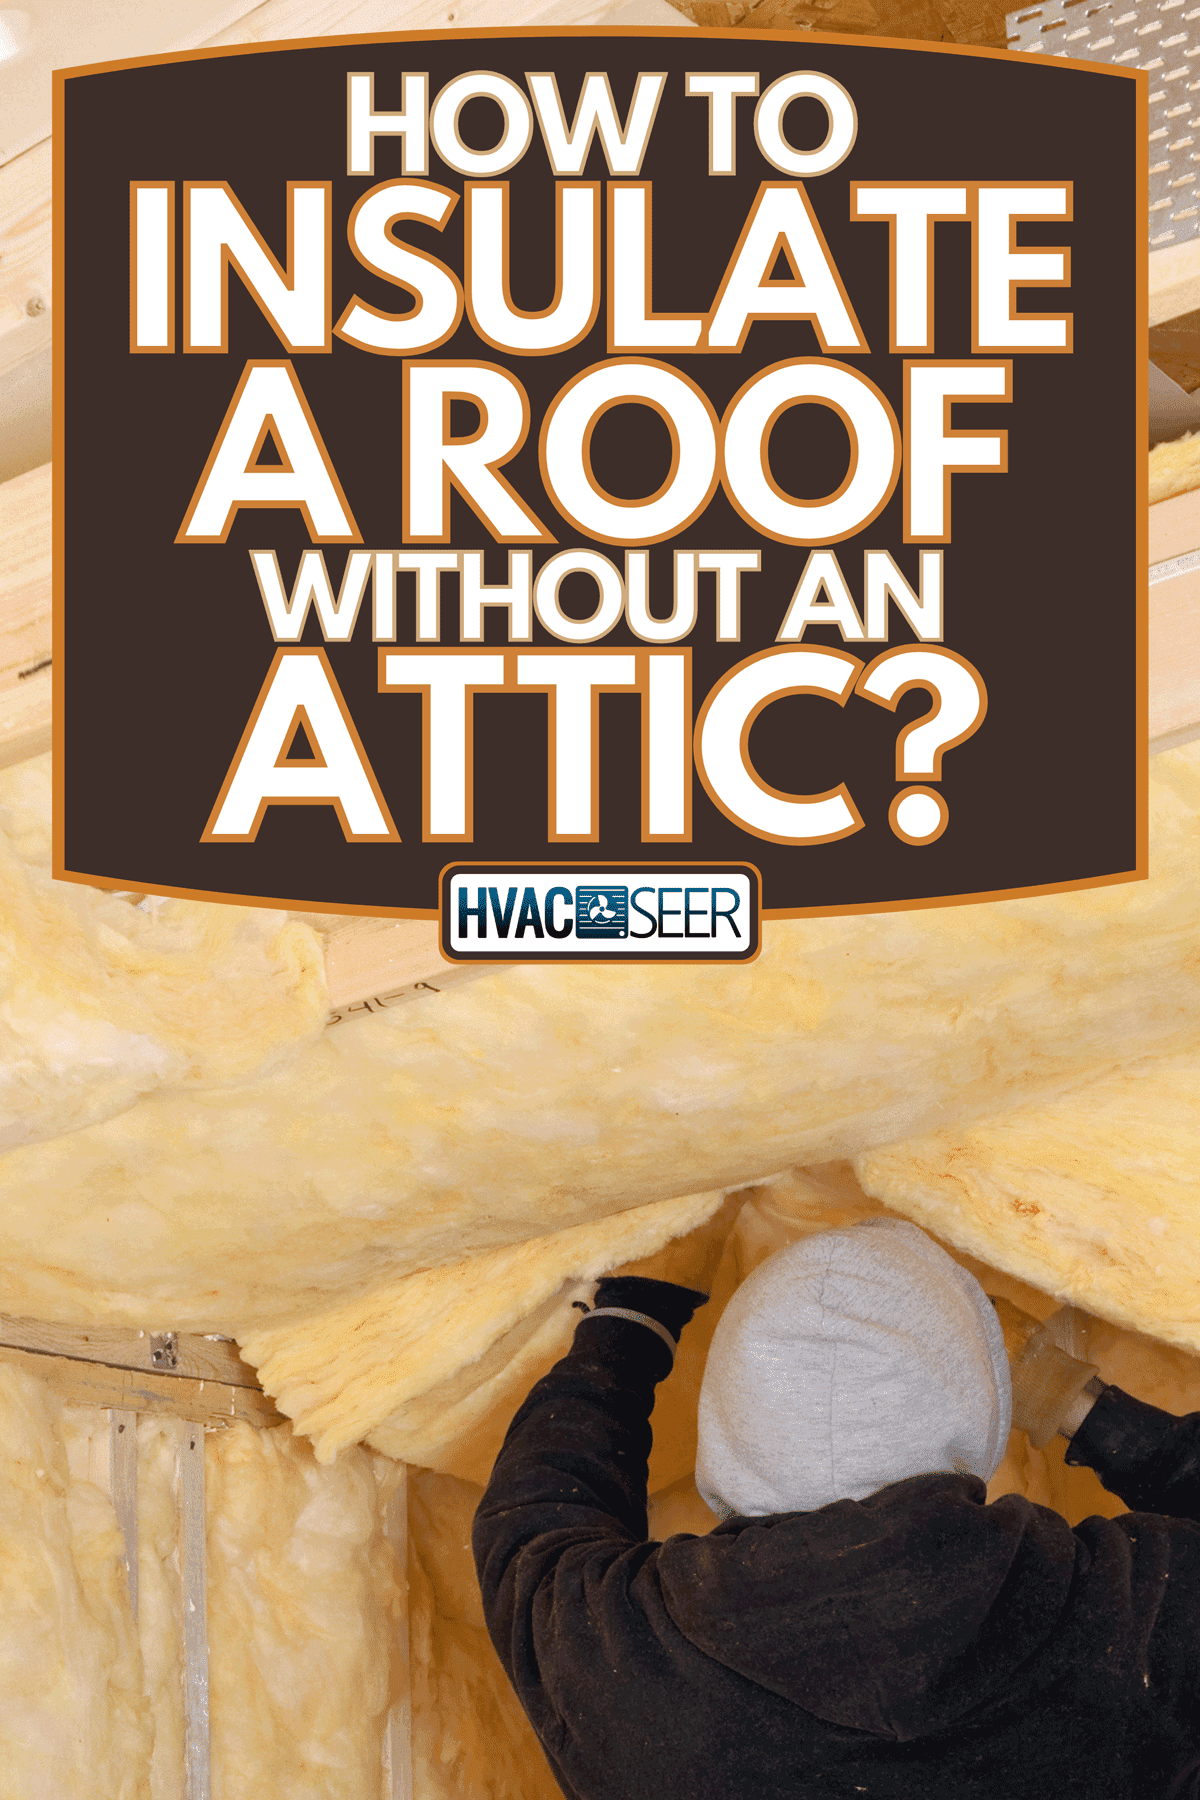 A worker installing fiberglass batt insulation between roof trusses, How To Insulate A Roof Without An Attic?